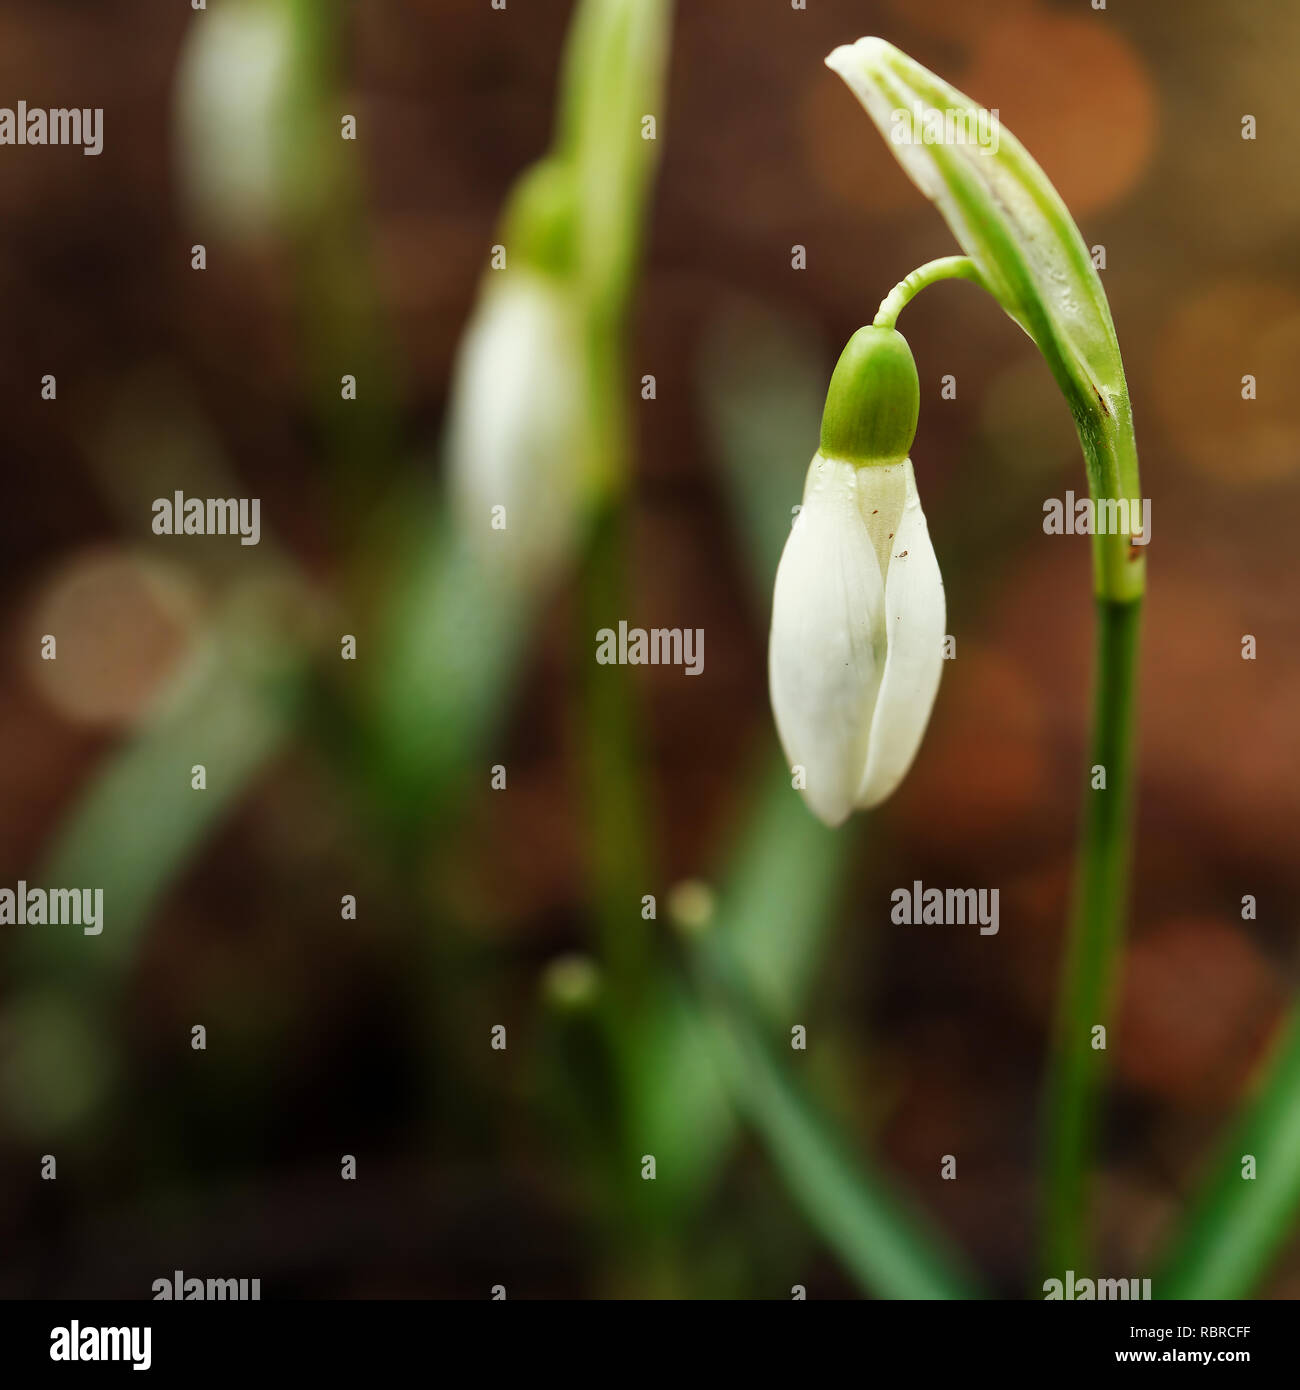 Snowdrops in the early spring garden. Stock Photo